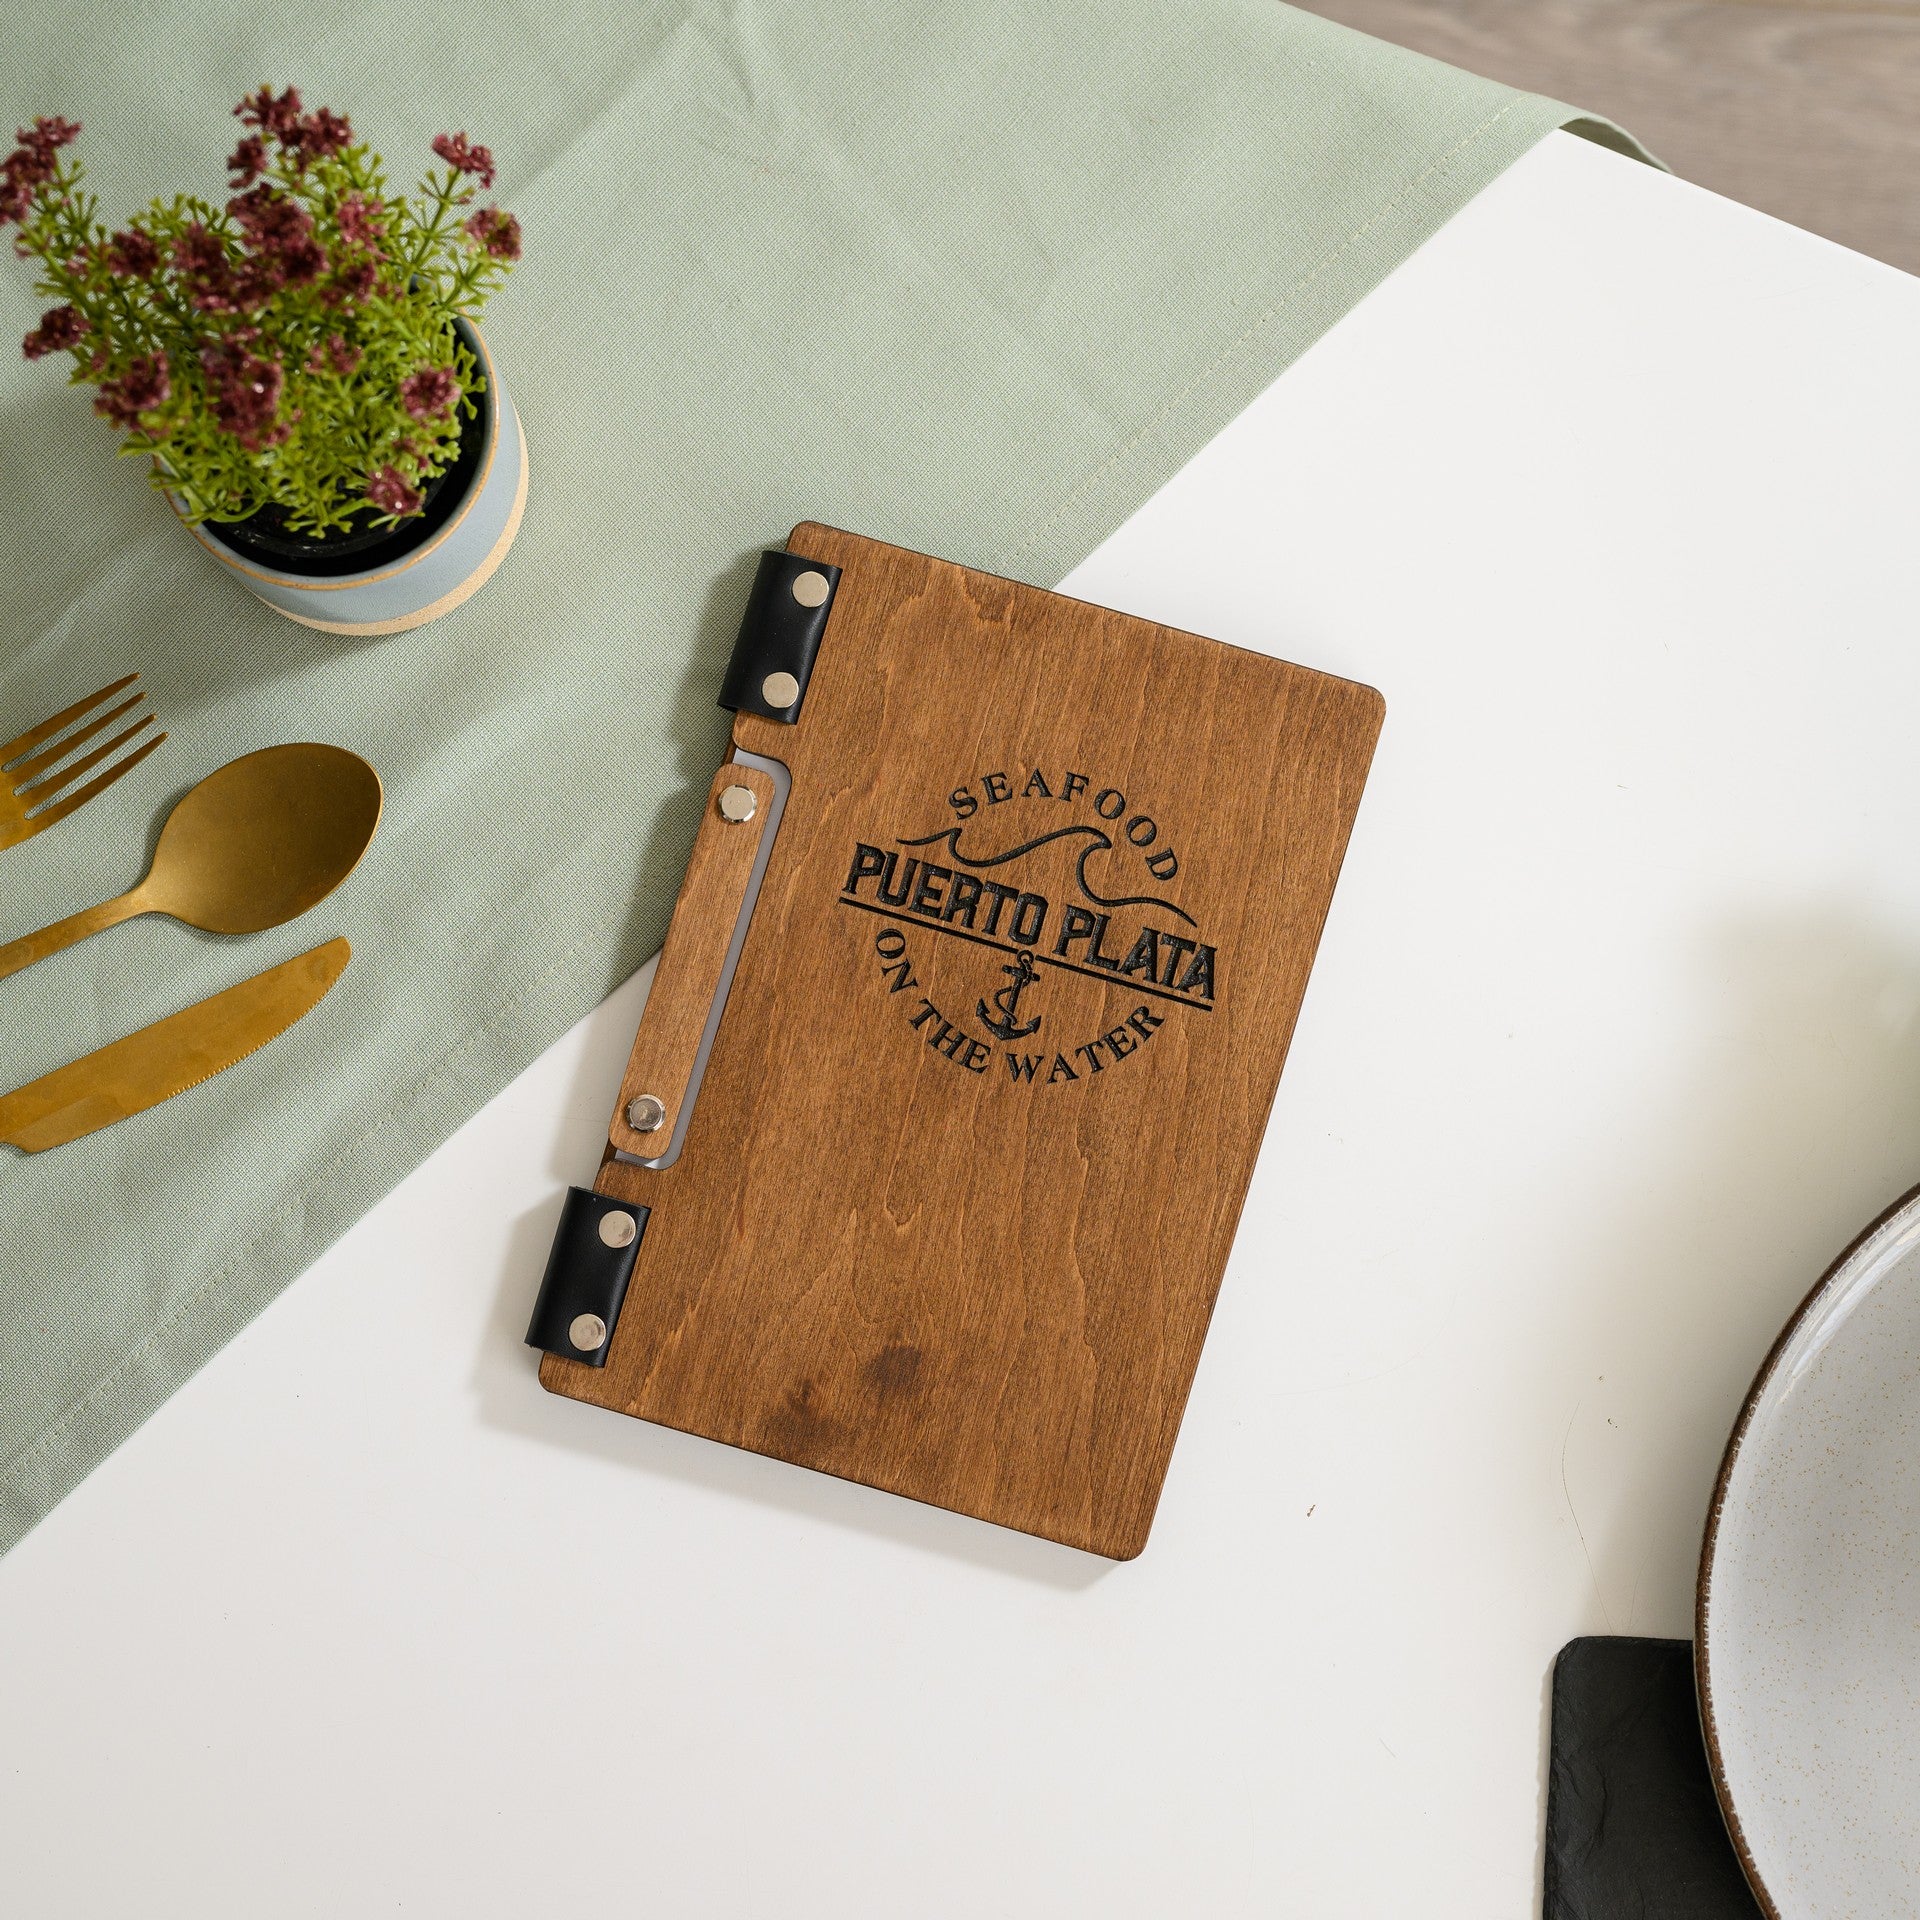 Elevate your presentation with our engraved wooden menu holder, adding rustic elegance to your establishment.